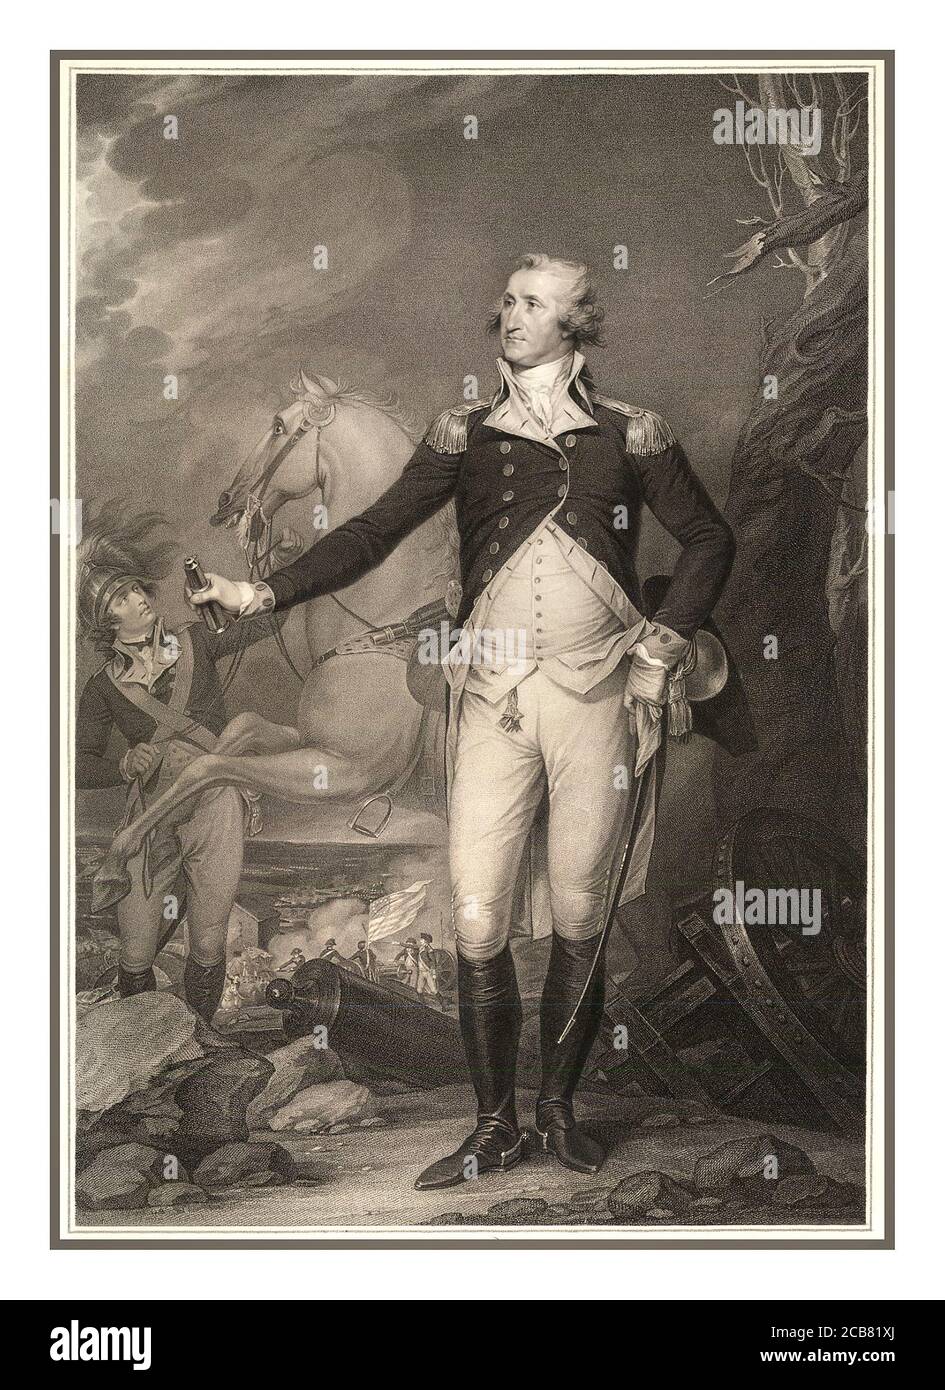 GEORGE WASHINGTON Vintage 1790's engraved lithograph portrait of General George Washington in uniform on the Battlefield at Trenton, engraved by John Cheesman and published by Antonio C. de Poggi in London, in 1796. Stock Photo